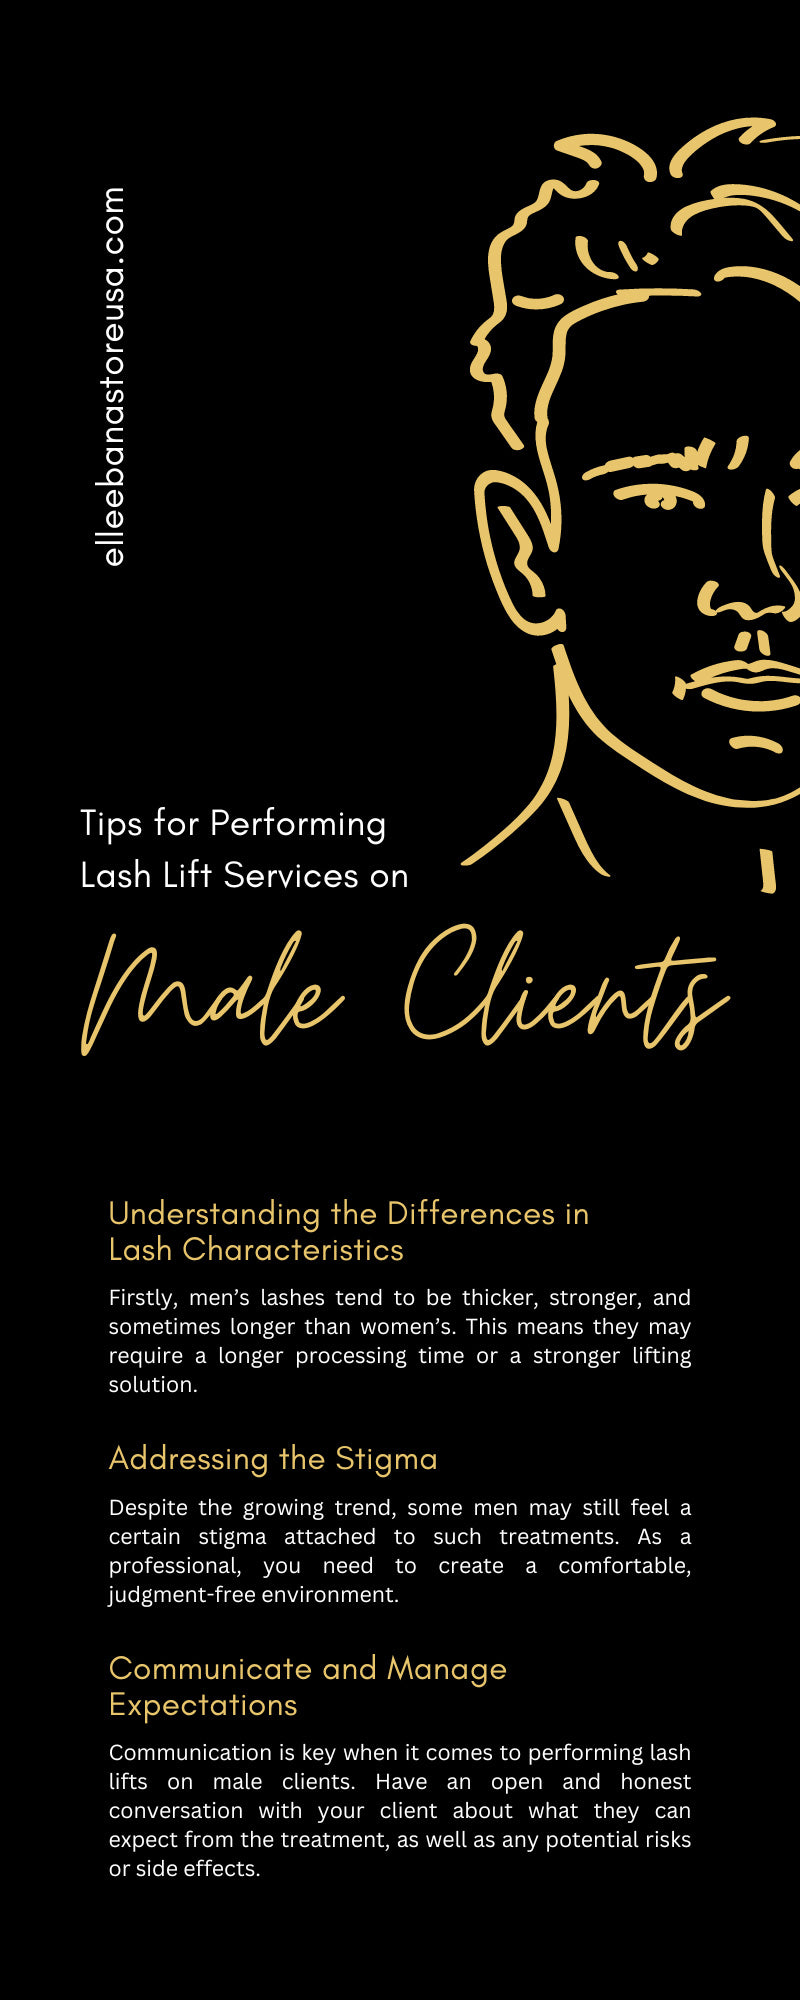 Tips for Performing Lash Lift Services on Male Clients